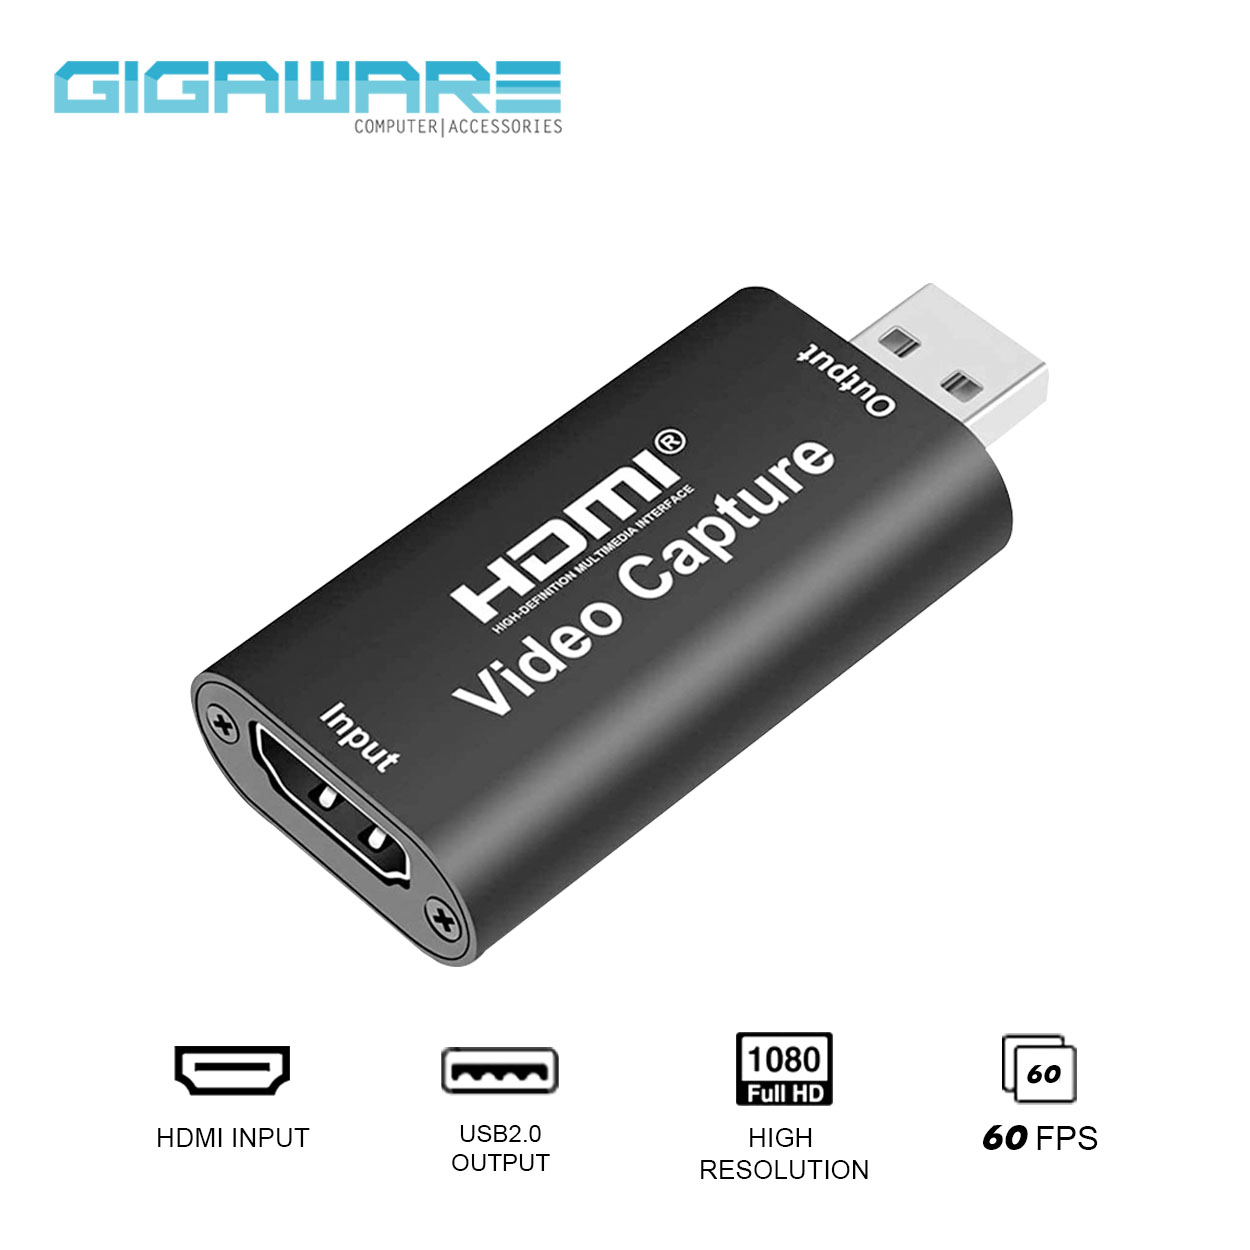 gigaware vhs to dvd converter sofware